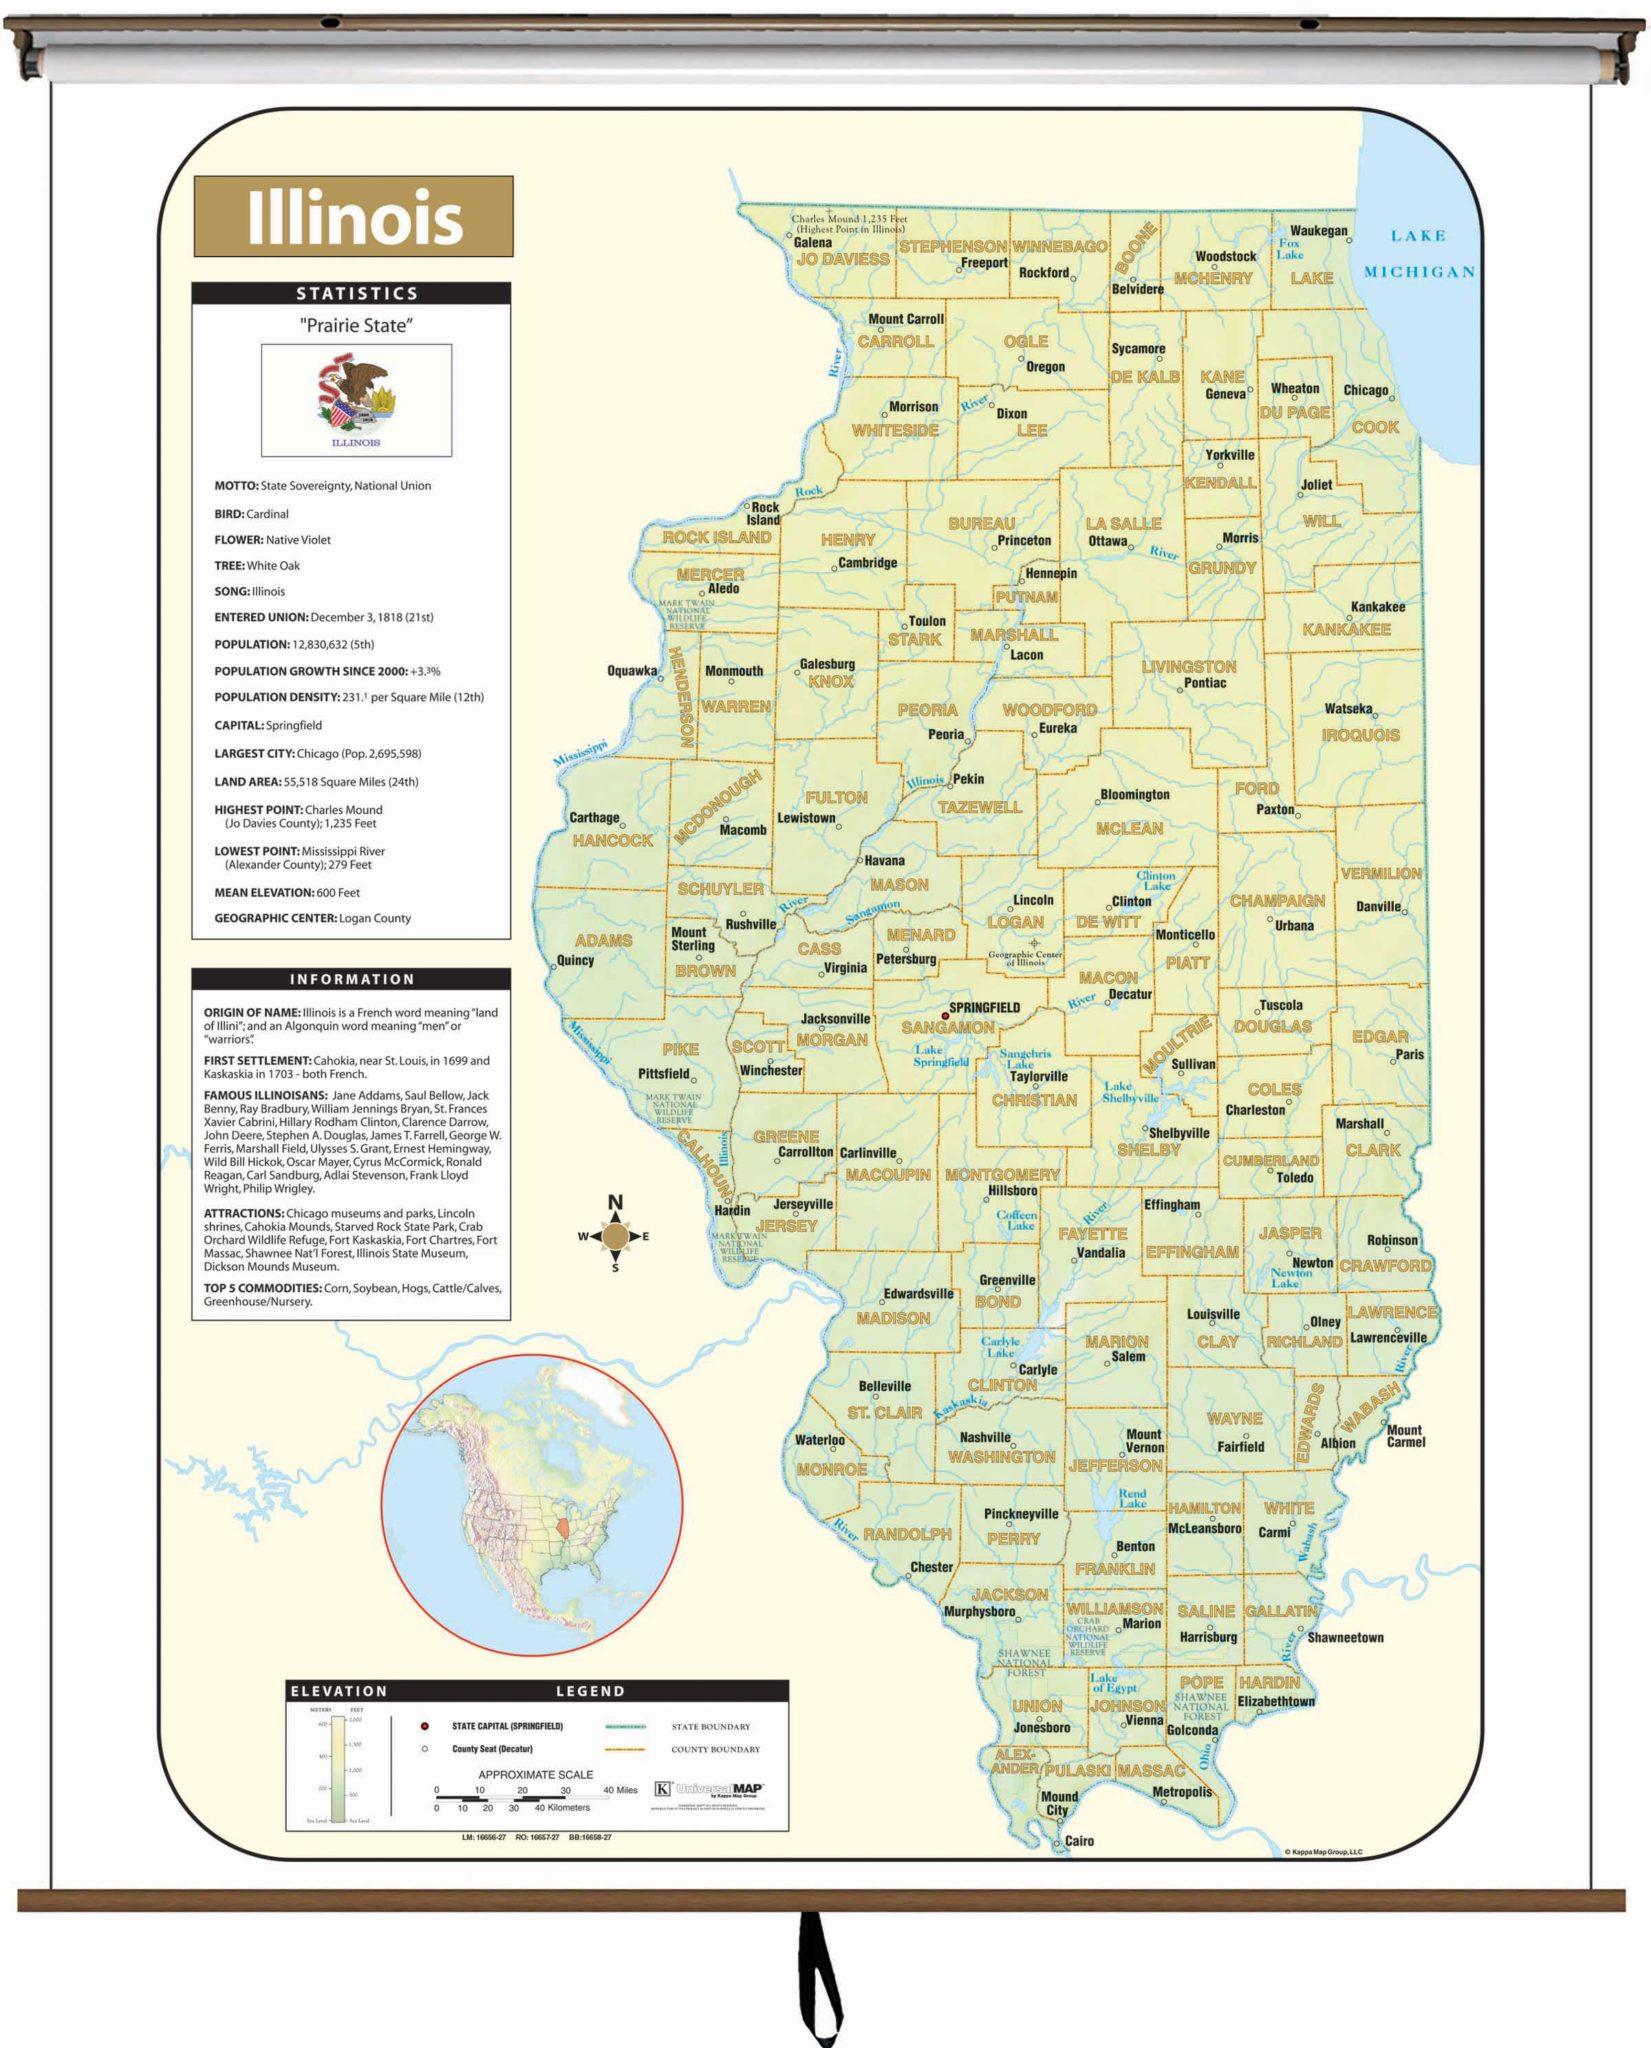 Illinois Large Scale Shaded Relief Wall Map on Roller with Backboard